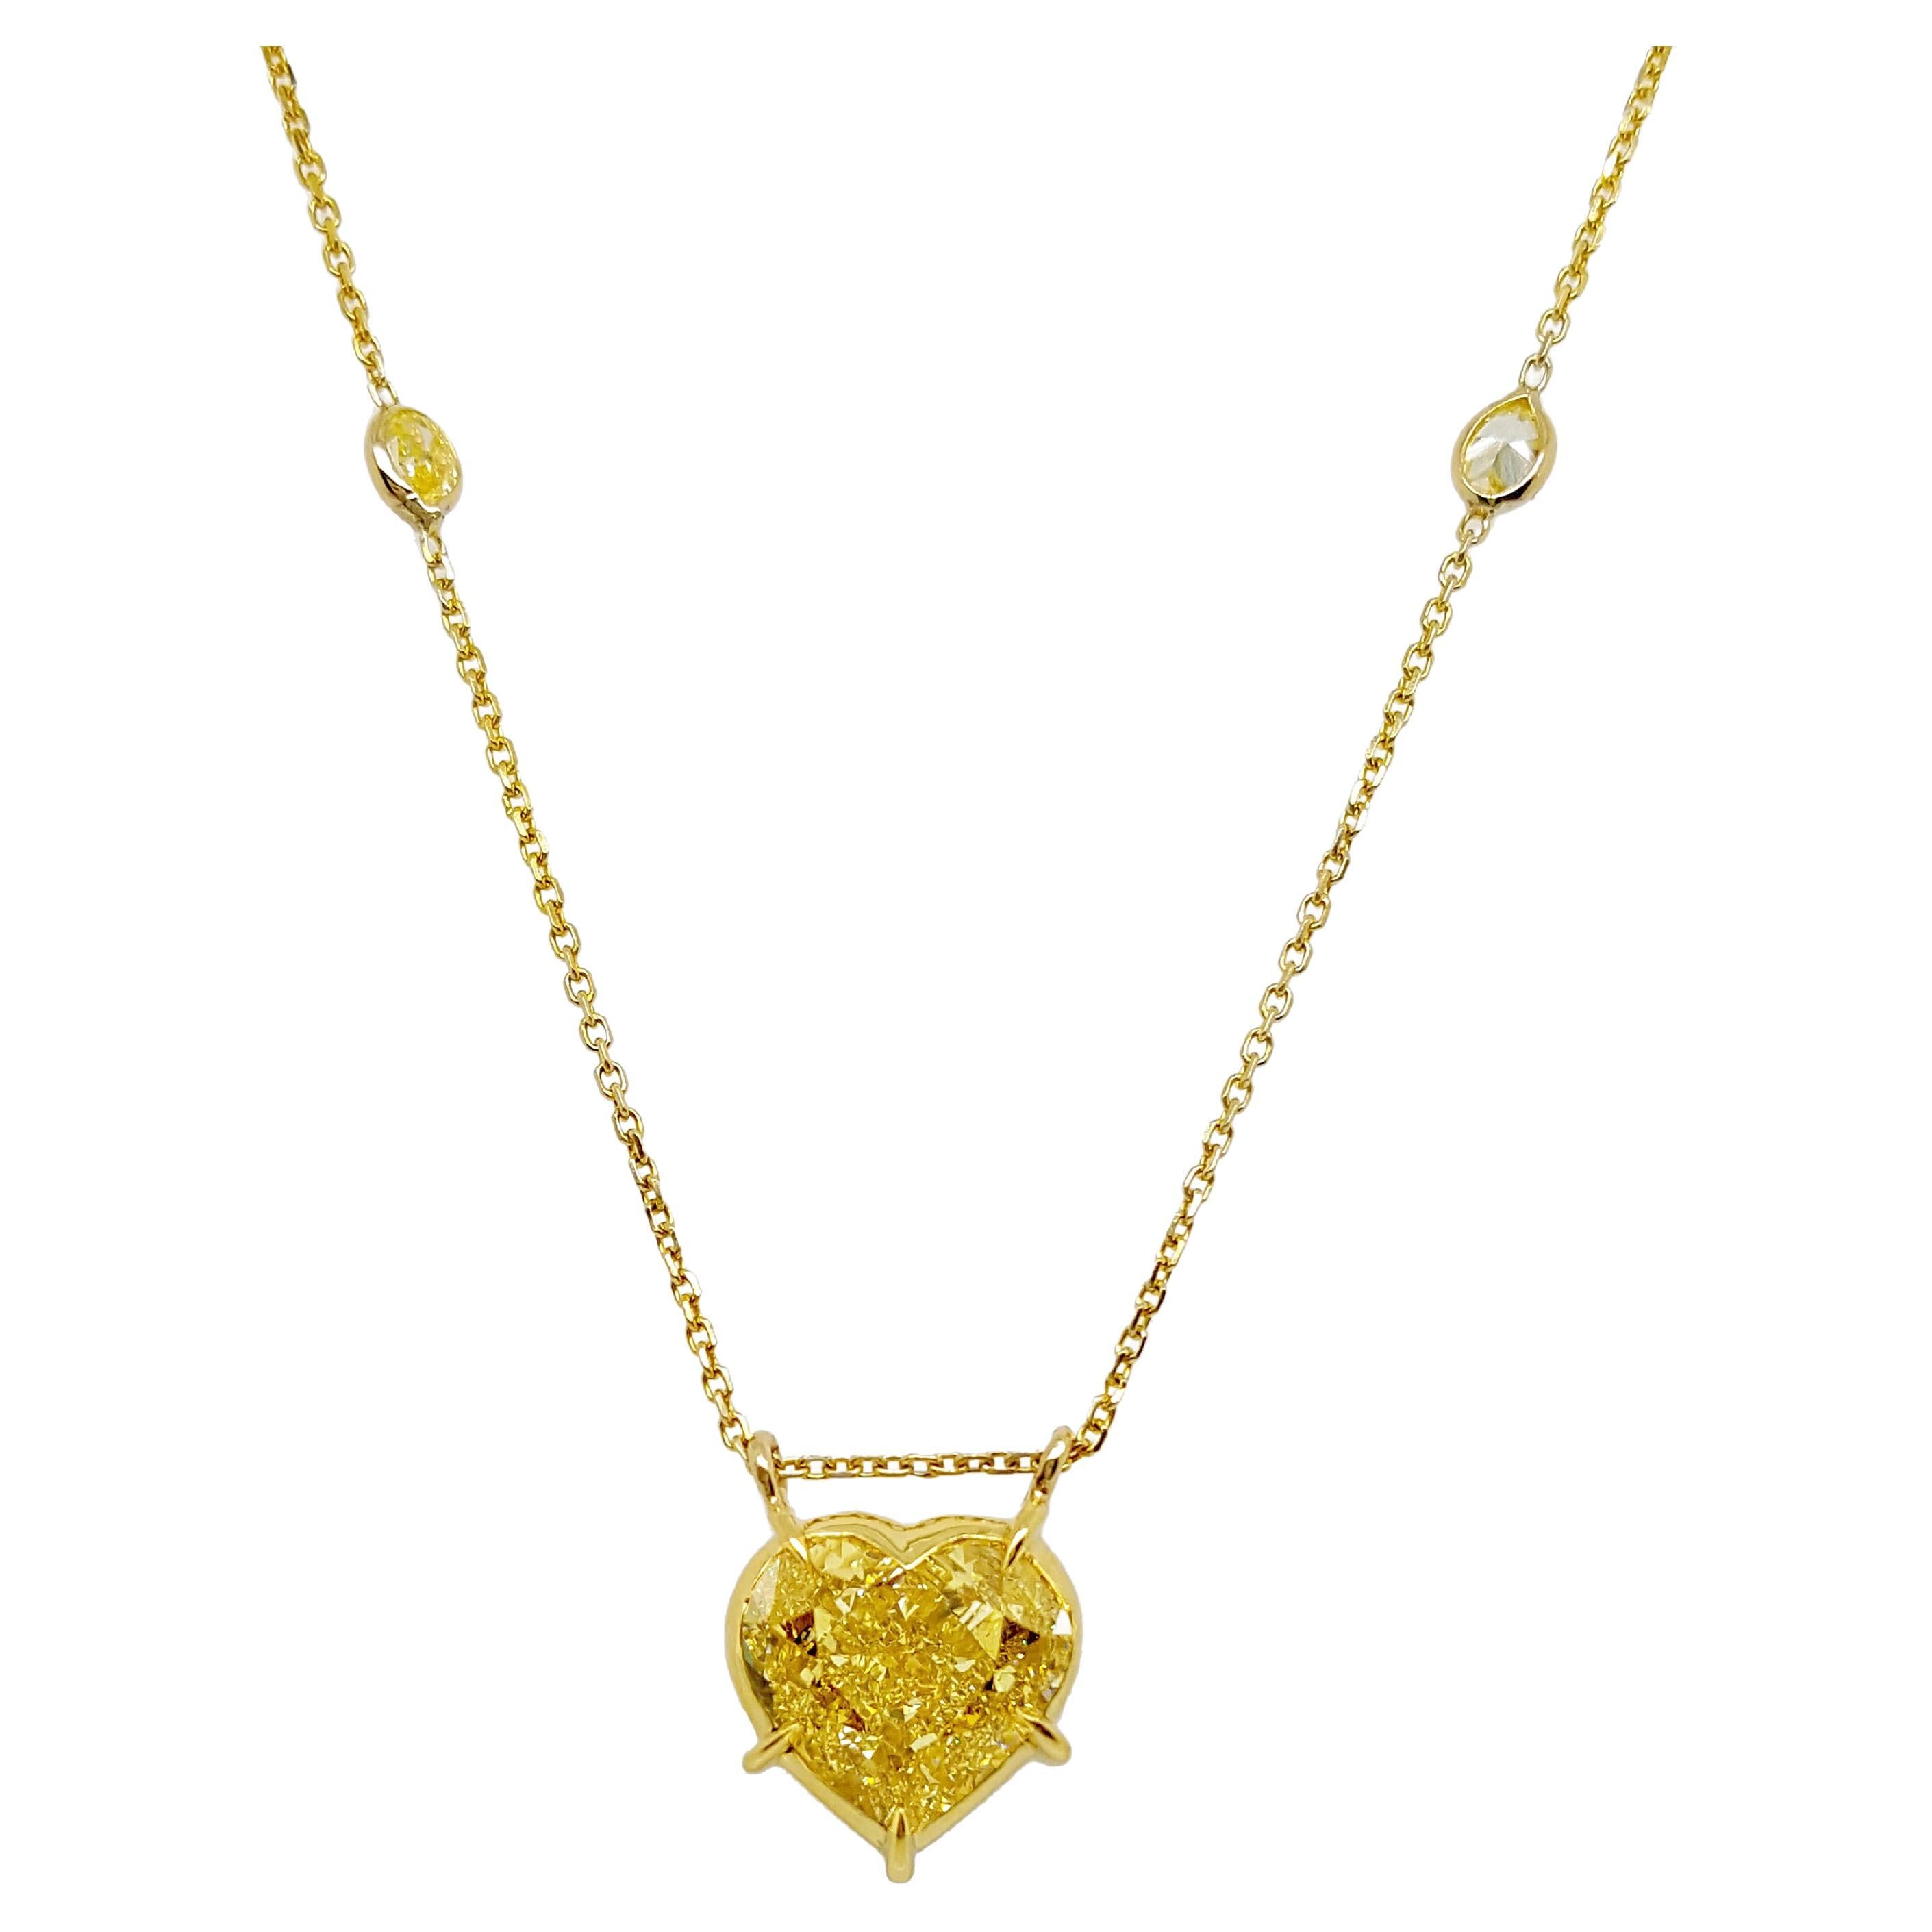 5 Carat Fancy Yellow Diamond Heart-Shaped Necklace 18K Yellow Gold GIA Certified For Sale